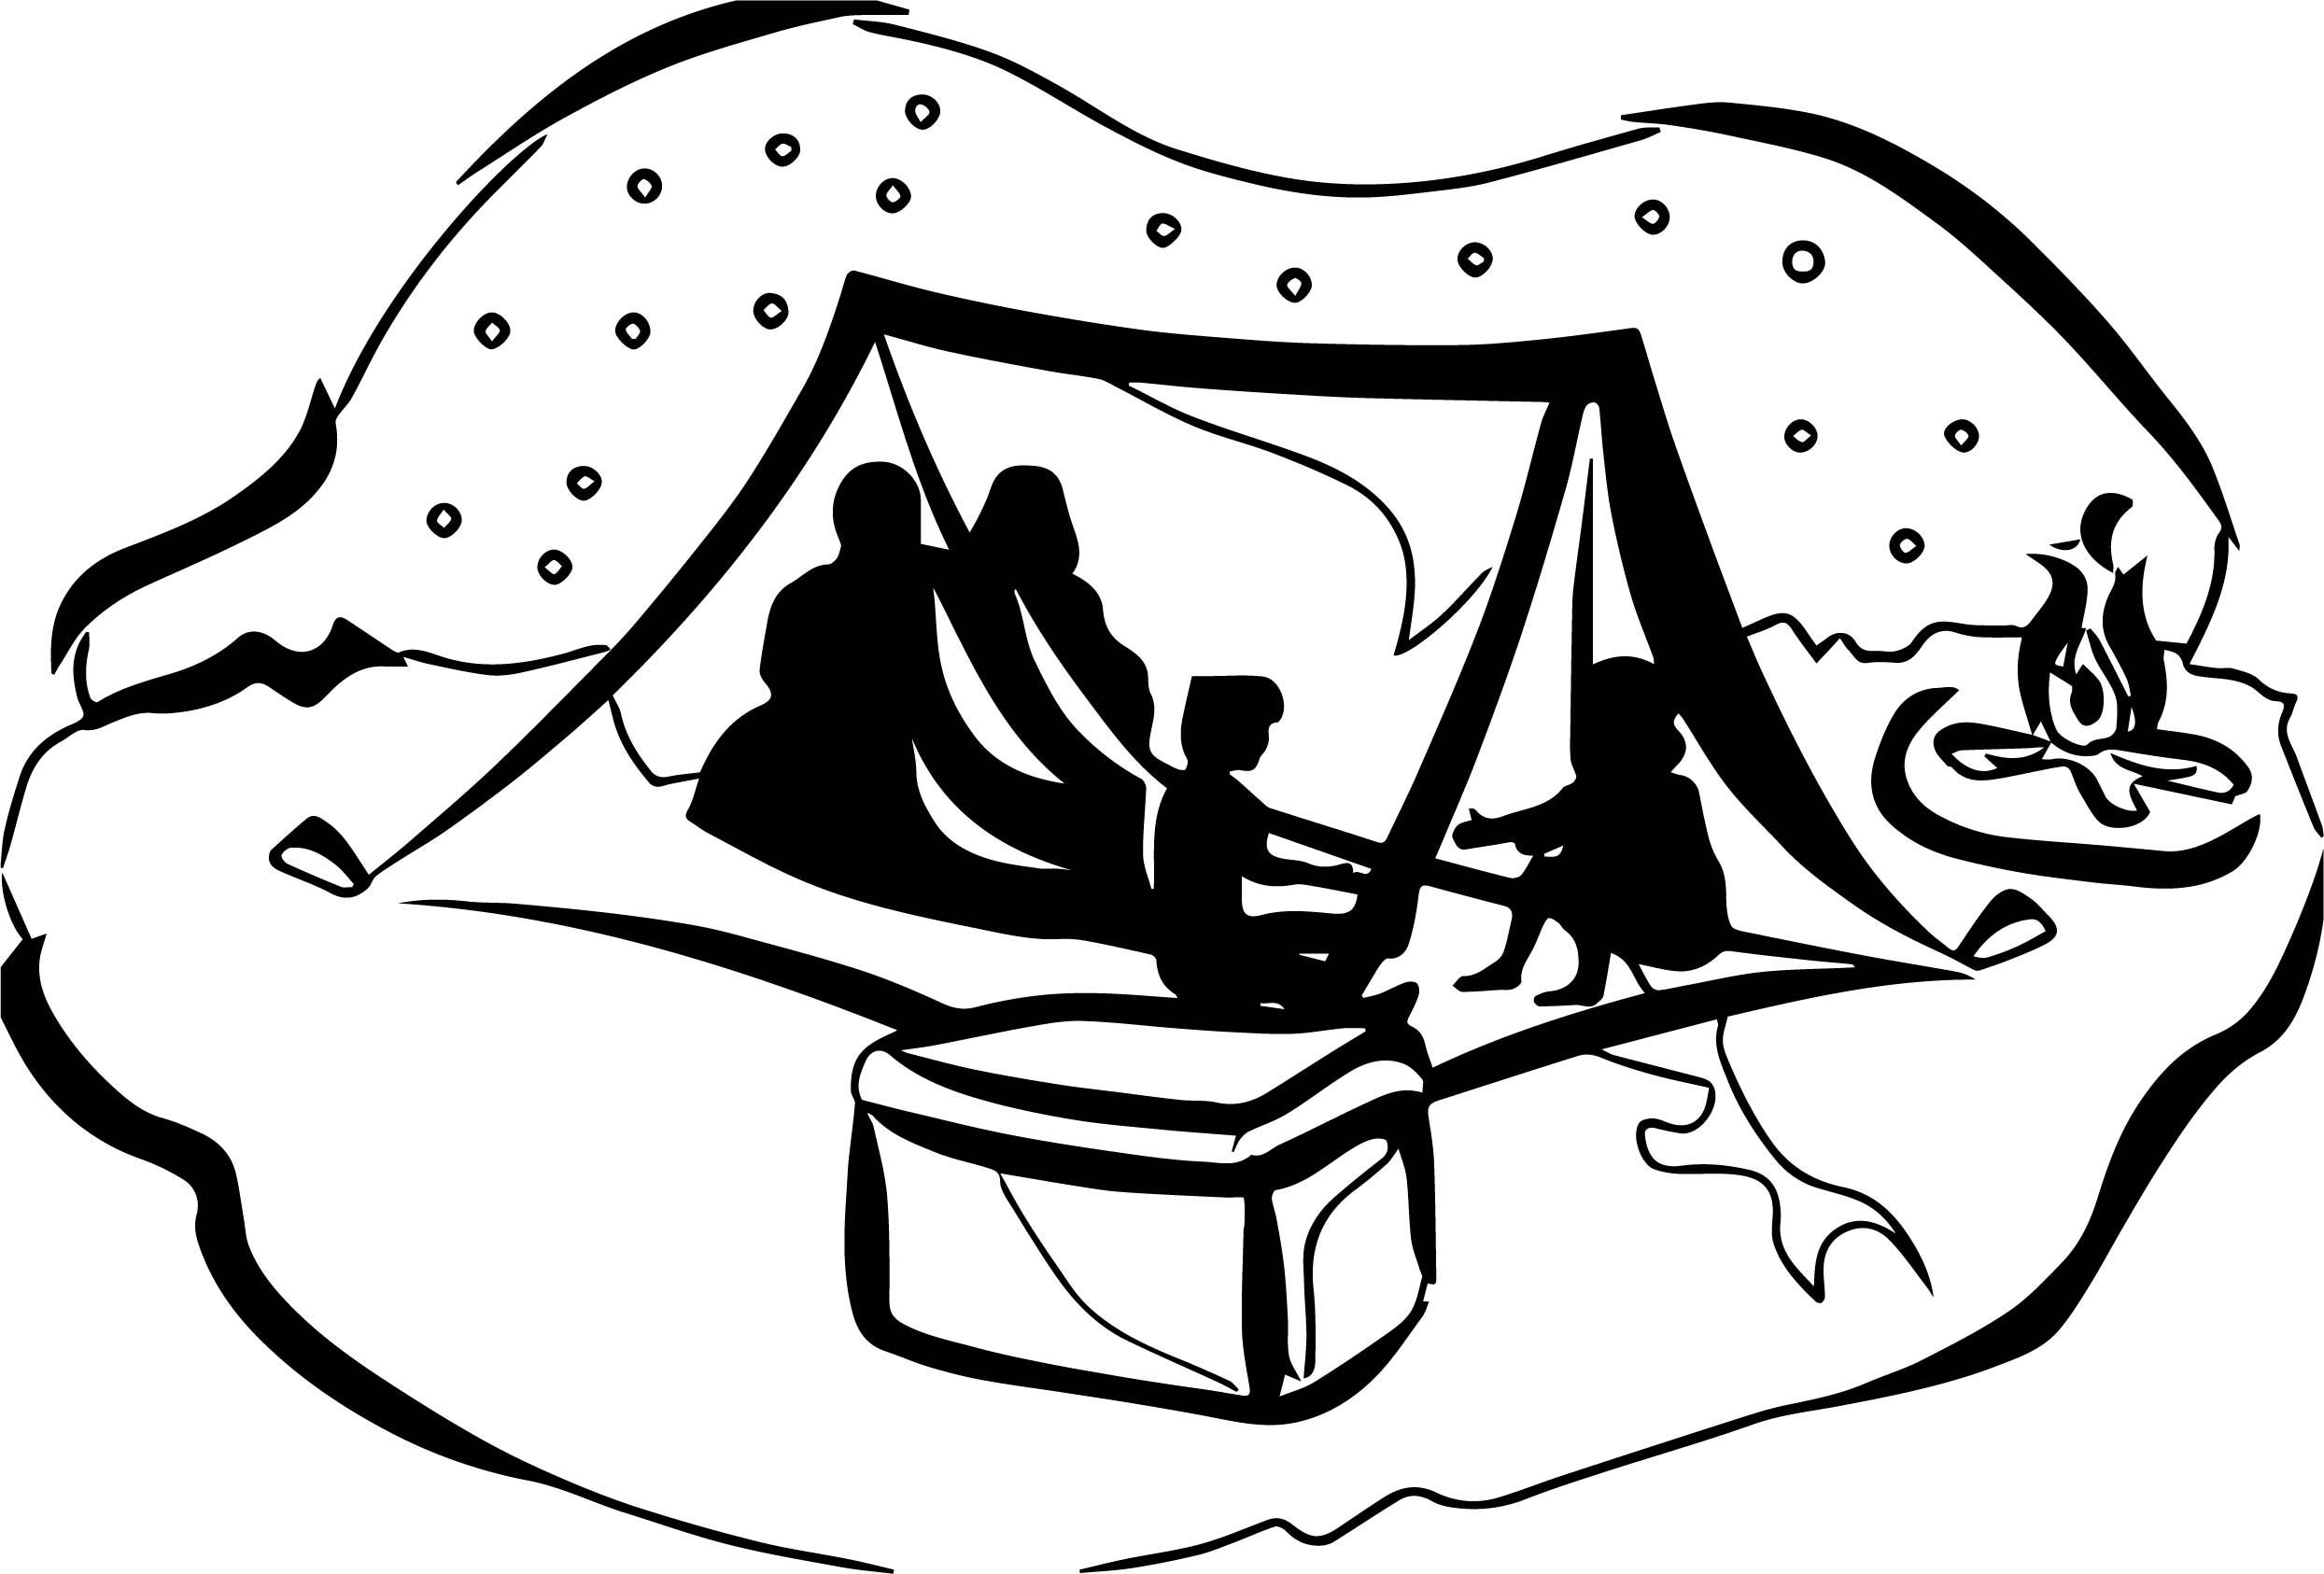 Camping clipart black. 